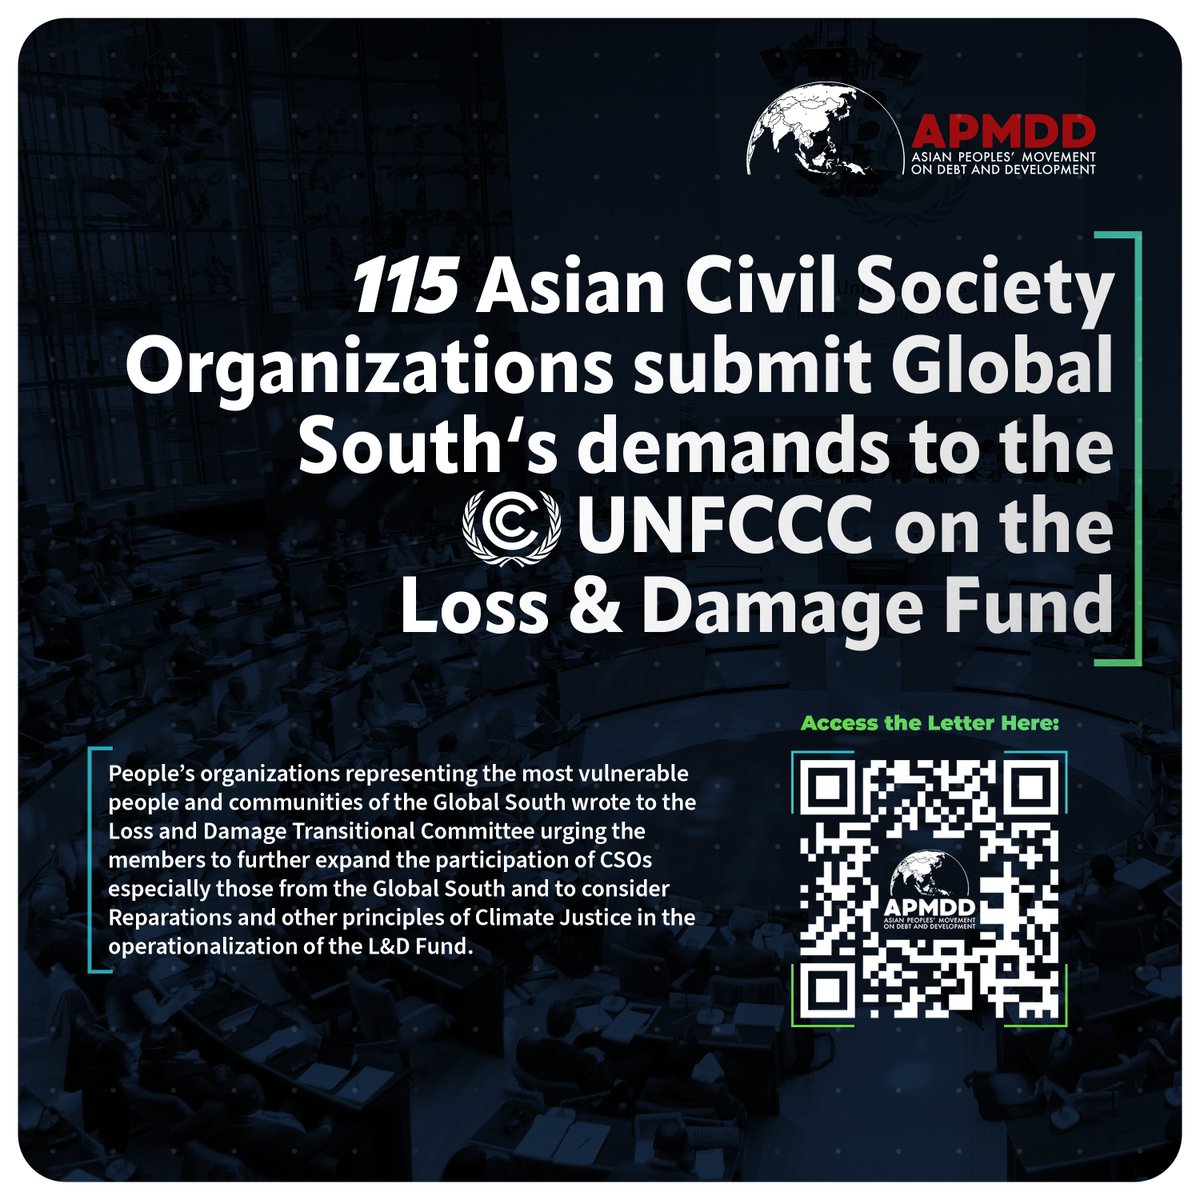 115 Asian movements representing the most vulnerable people & communities in the Global South wrote to the L&D Transitional Committee meeting at Luxor now, urging them to consider #Reparations & key #ClimateJustice principles to the Loss & Damage Fund. bit.ly/LetterToTC